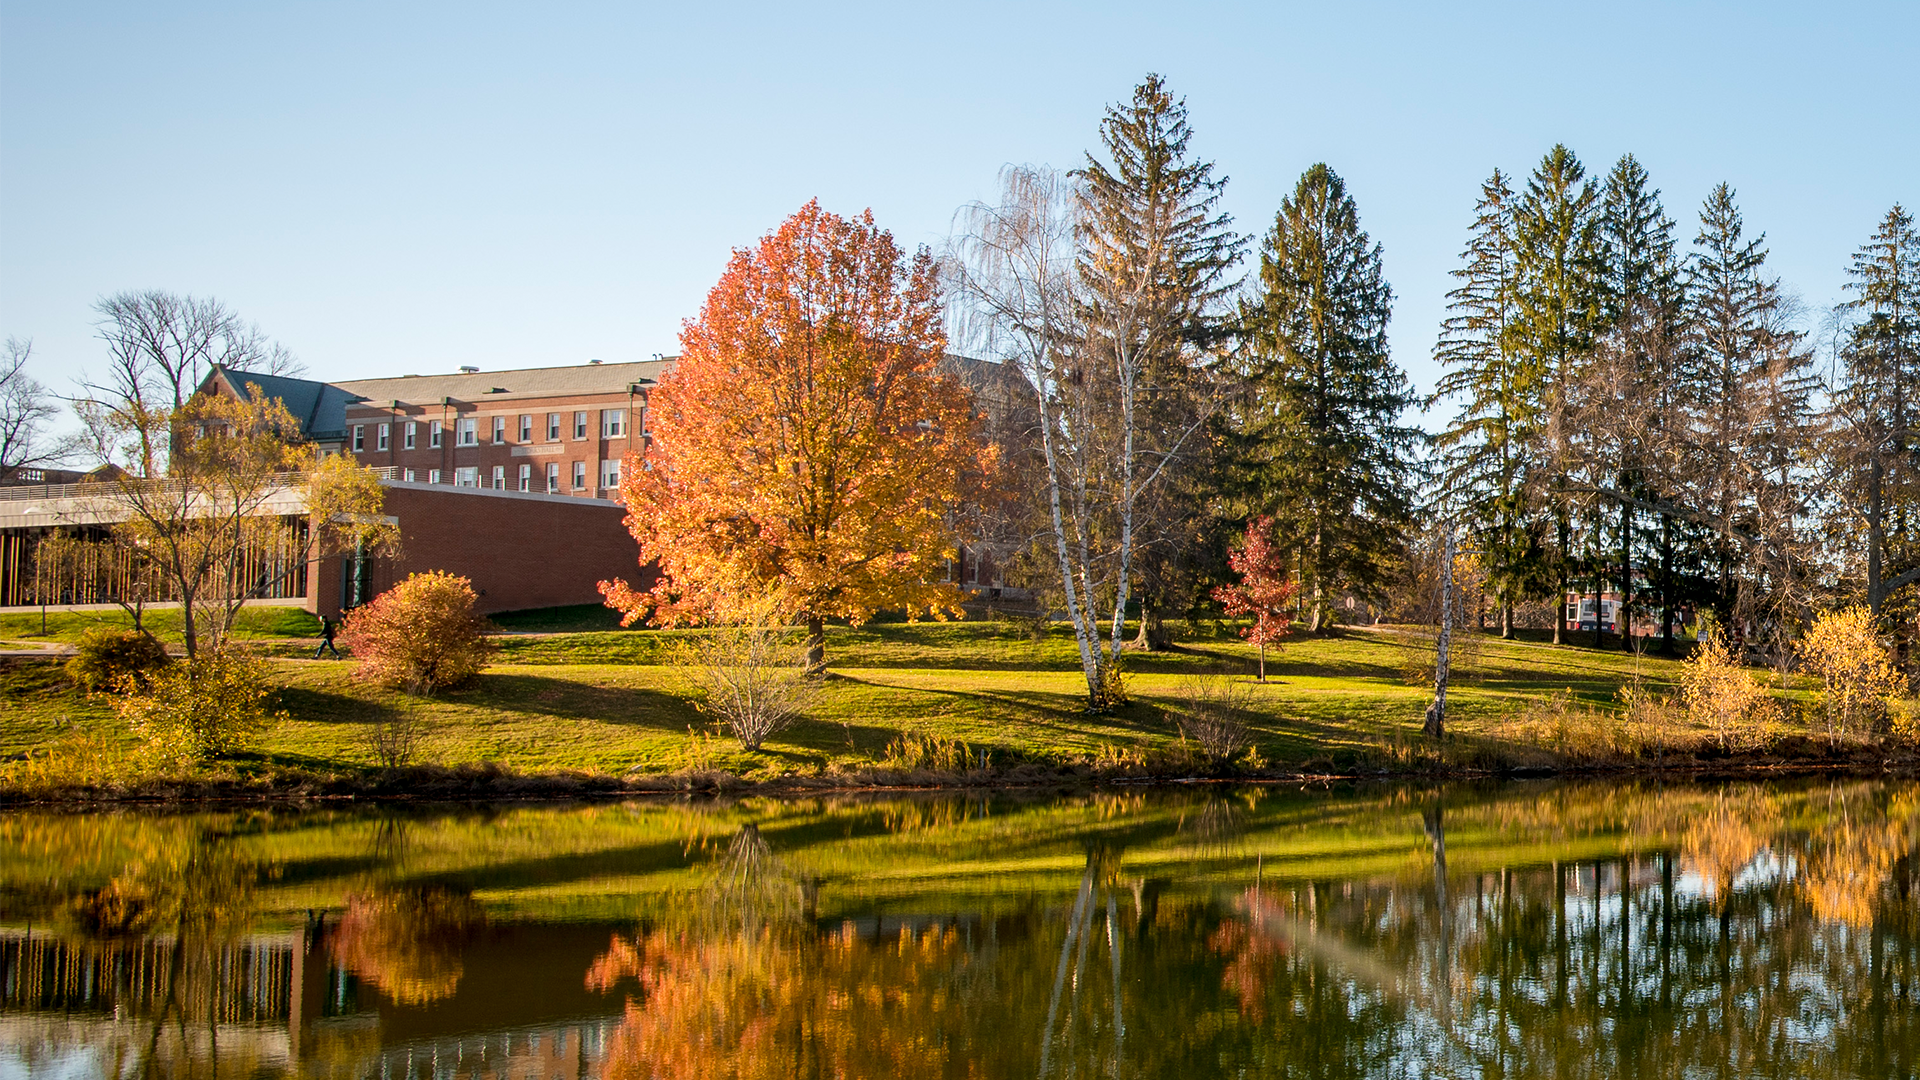 Storrs Hall in autumn